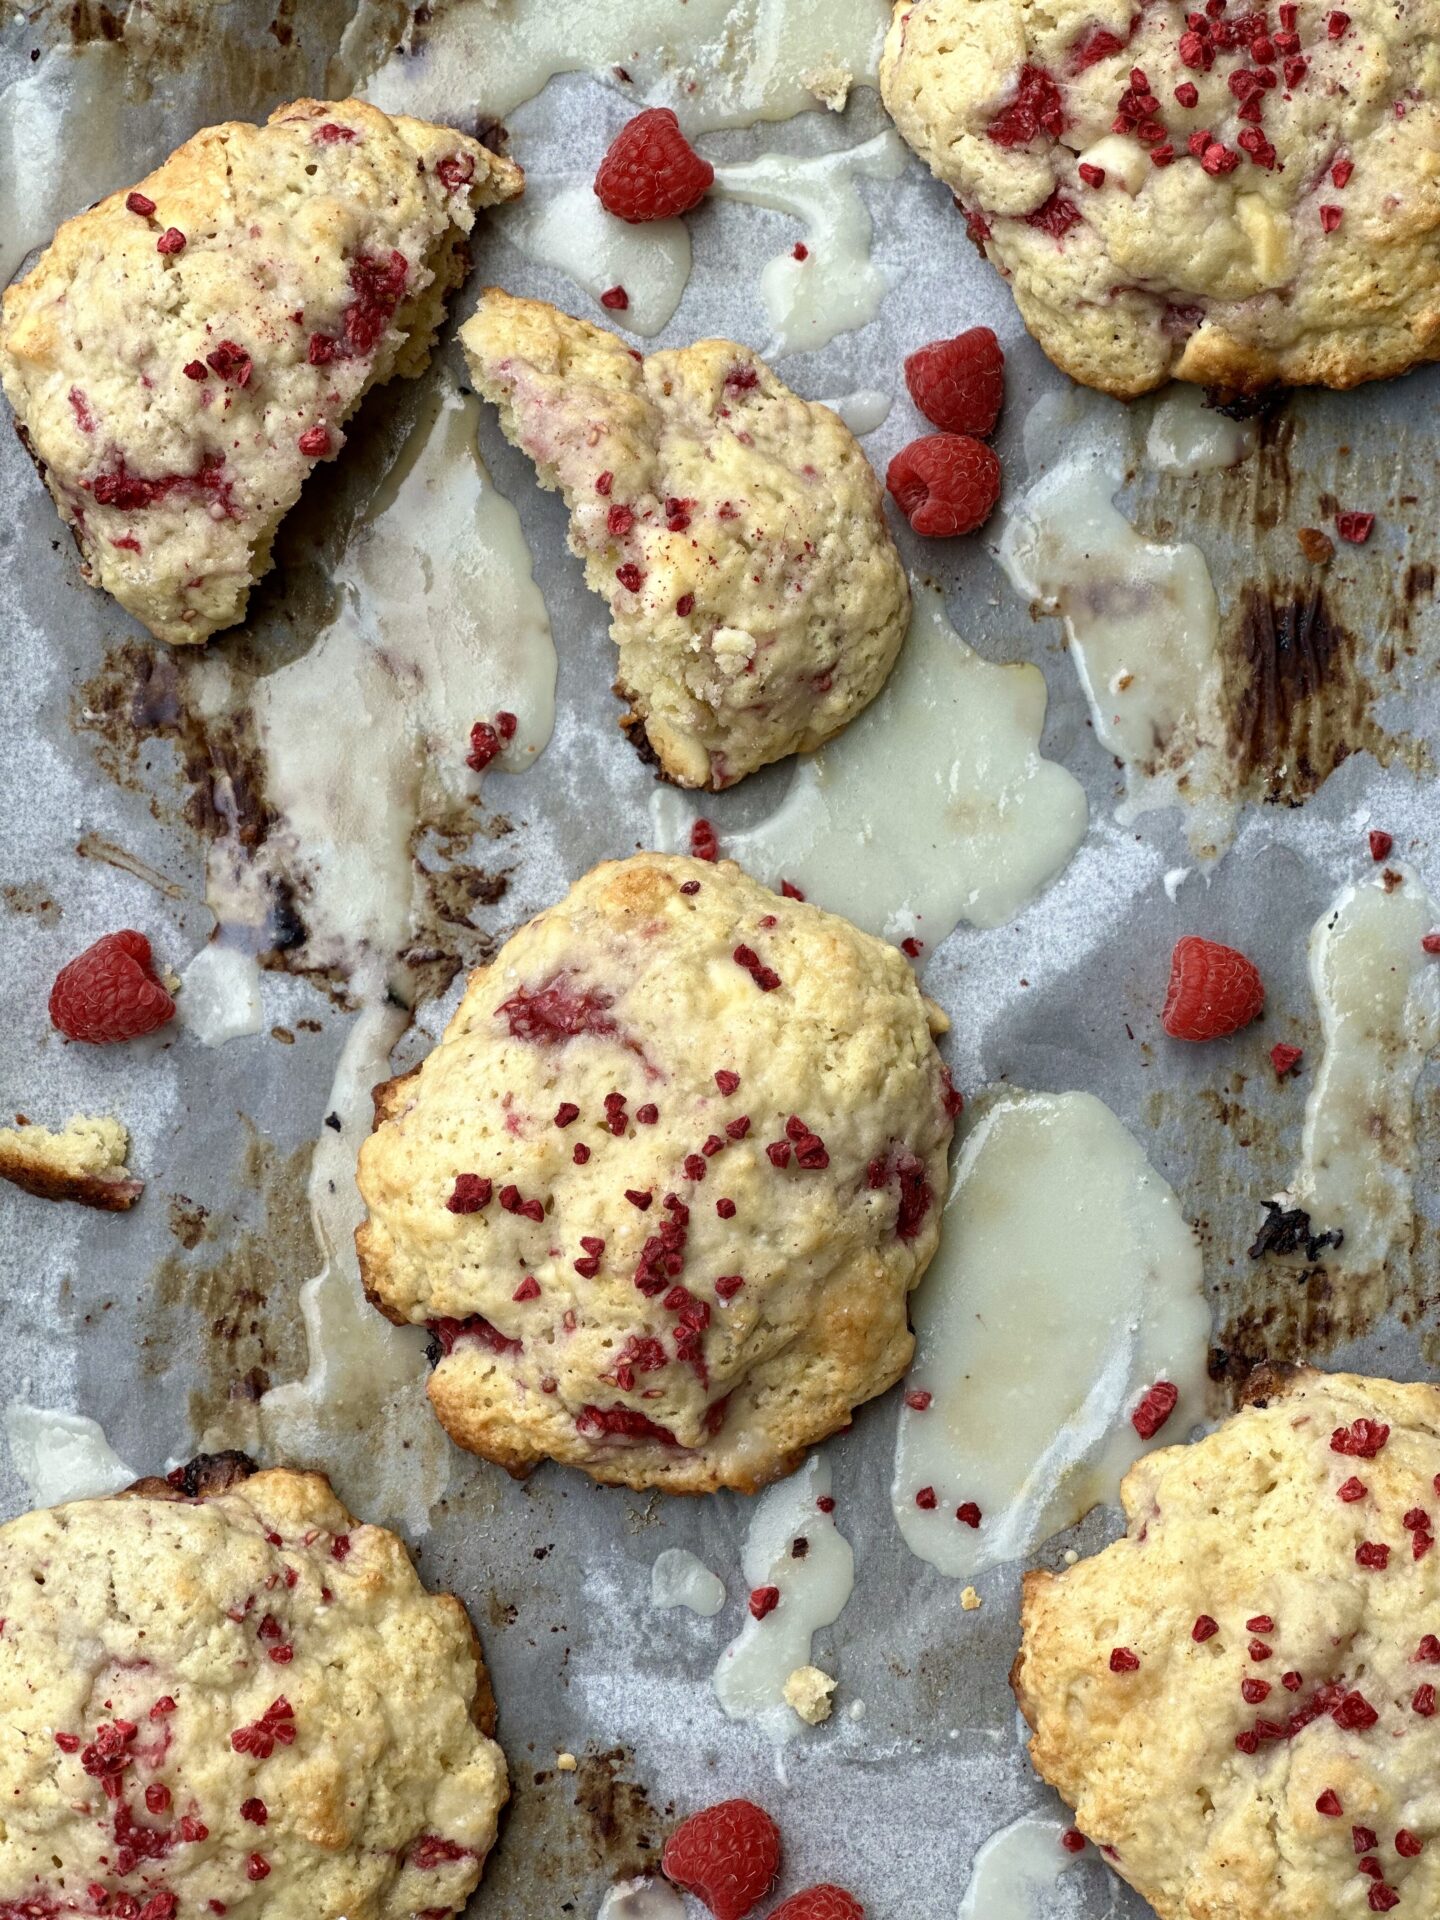 Baking sheet with freshly baked Raspberry White Chocolate Scones with dripping white chocolate glaze and fresh raspberries